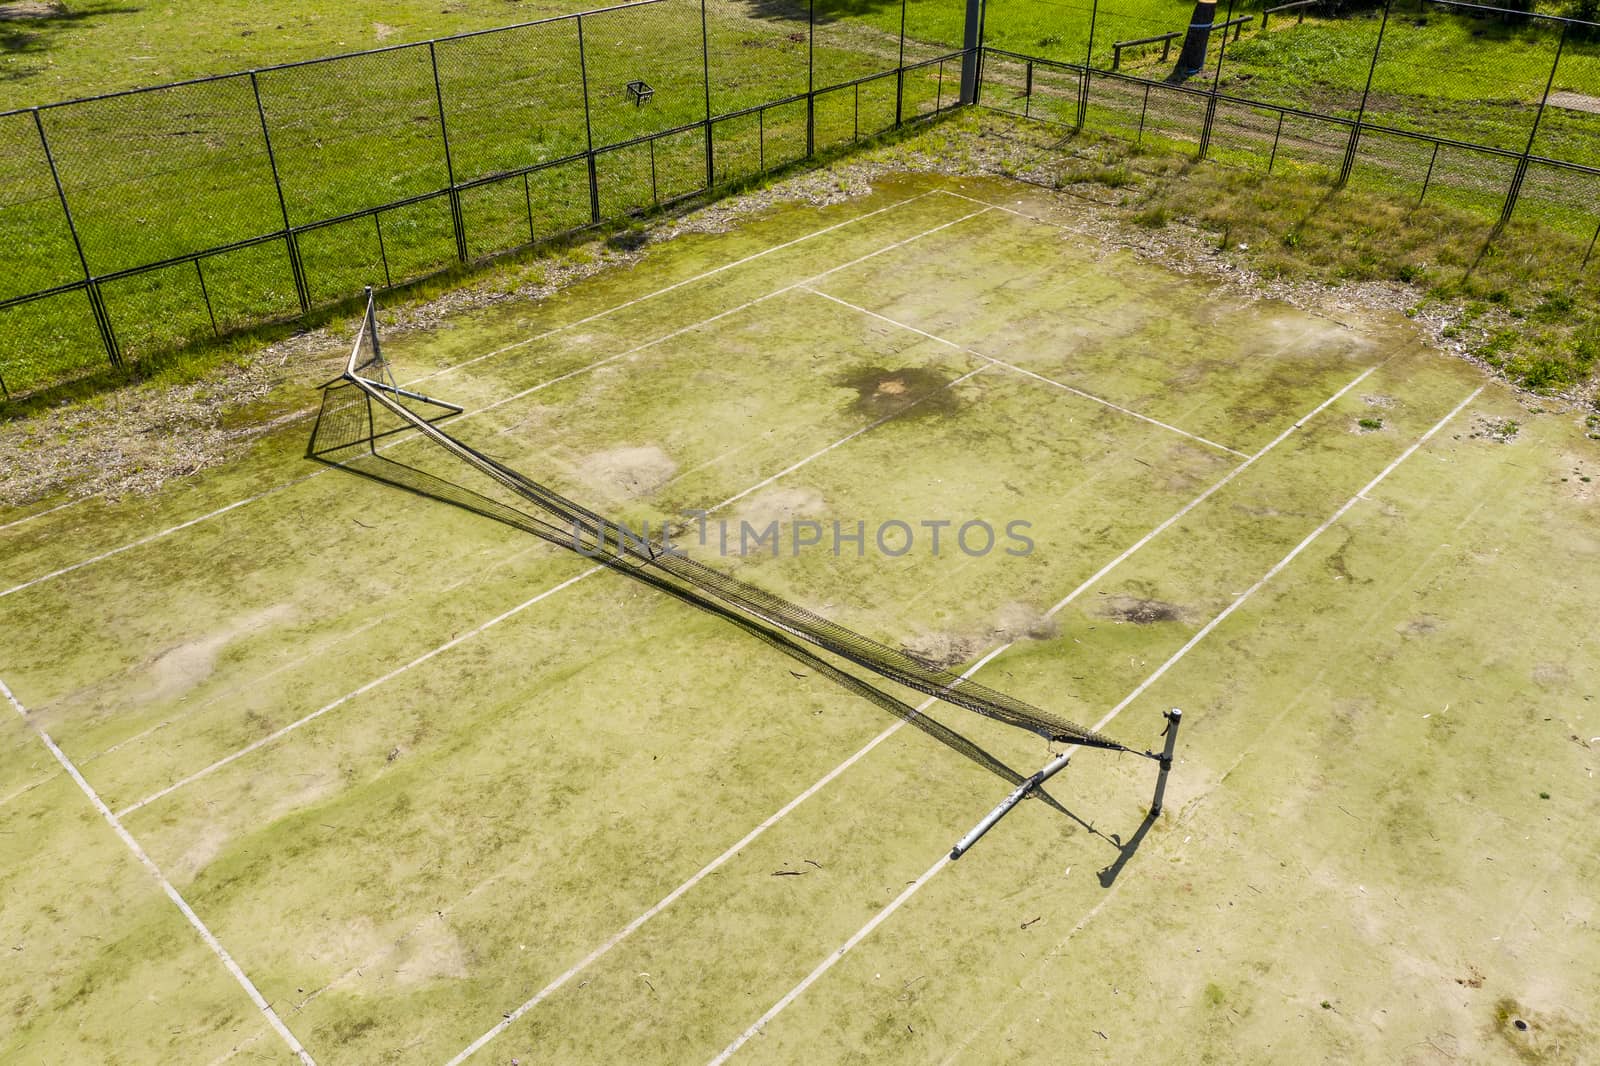 An old unused tennis court in a public park in a small regional by WittkePhotos